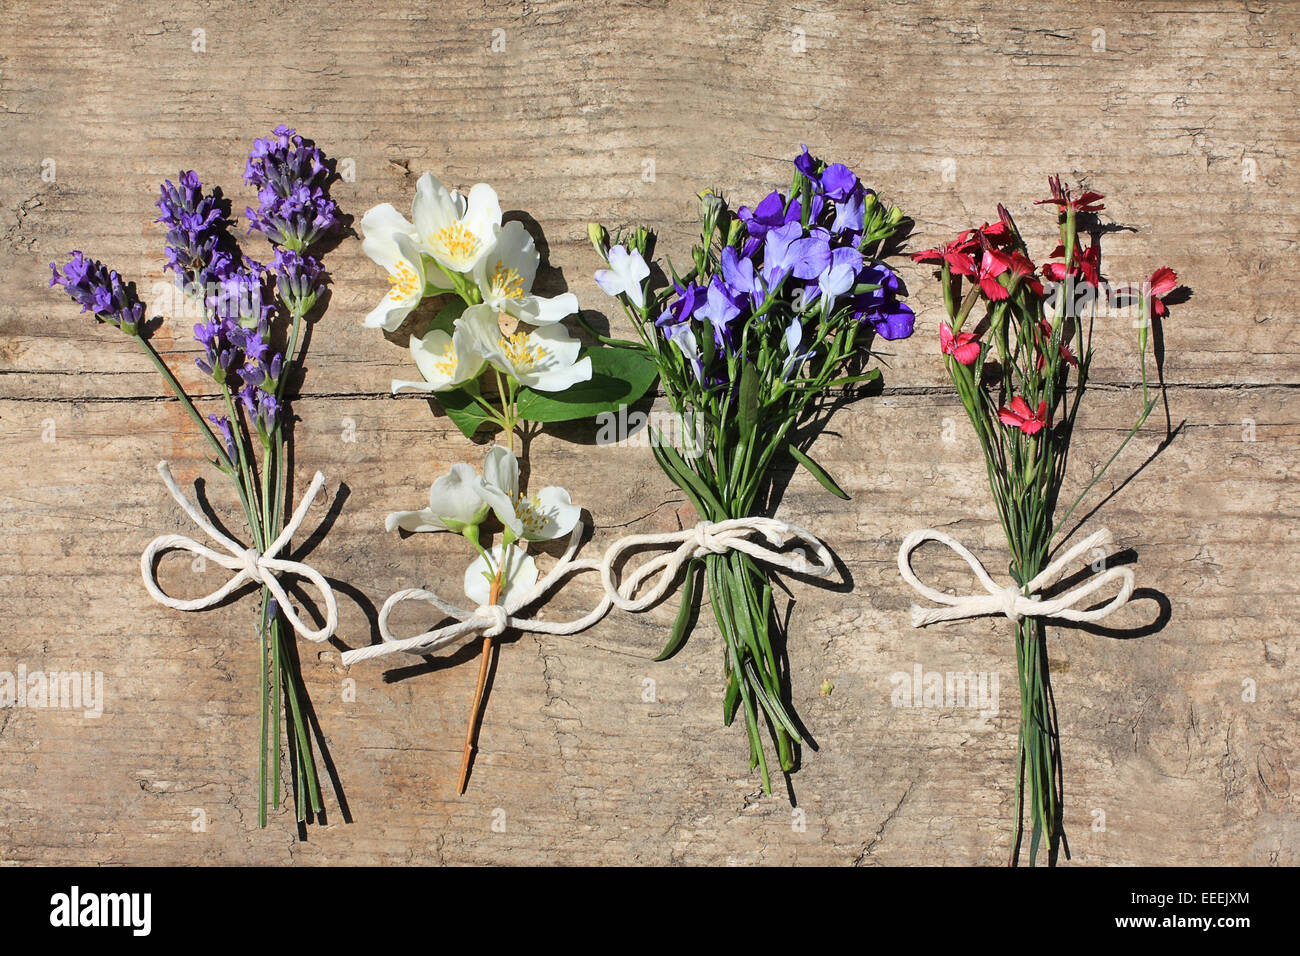 Various flowers on the wooden, rustic table Stock Photo